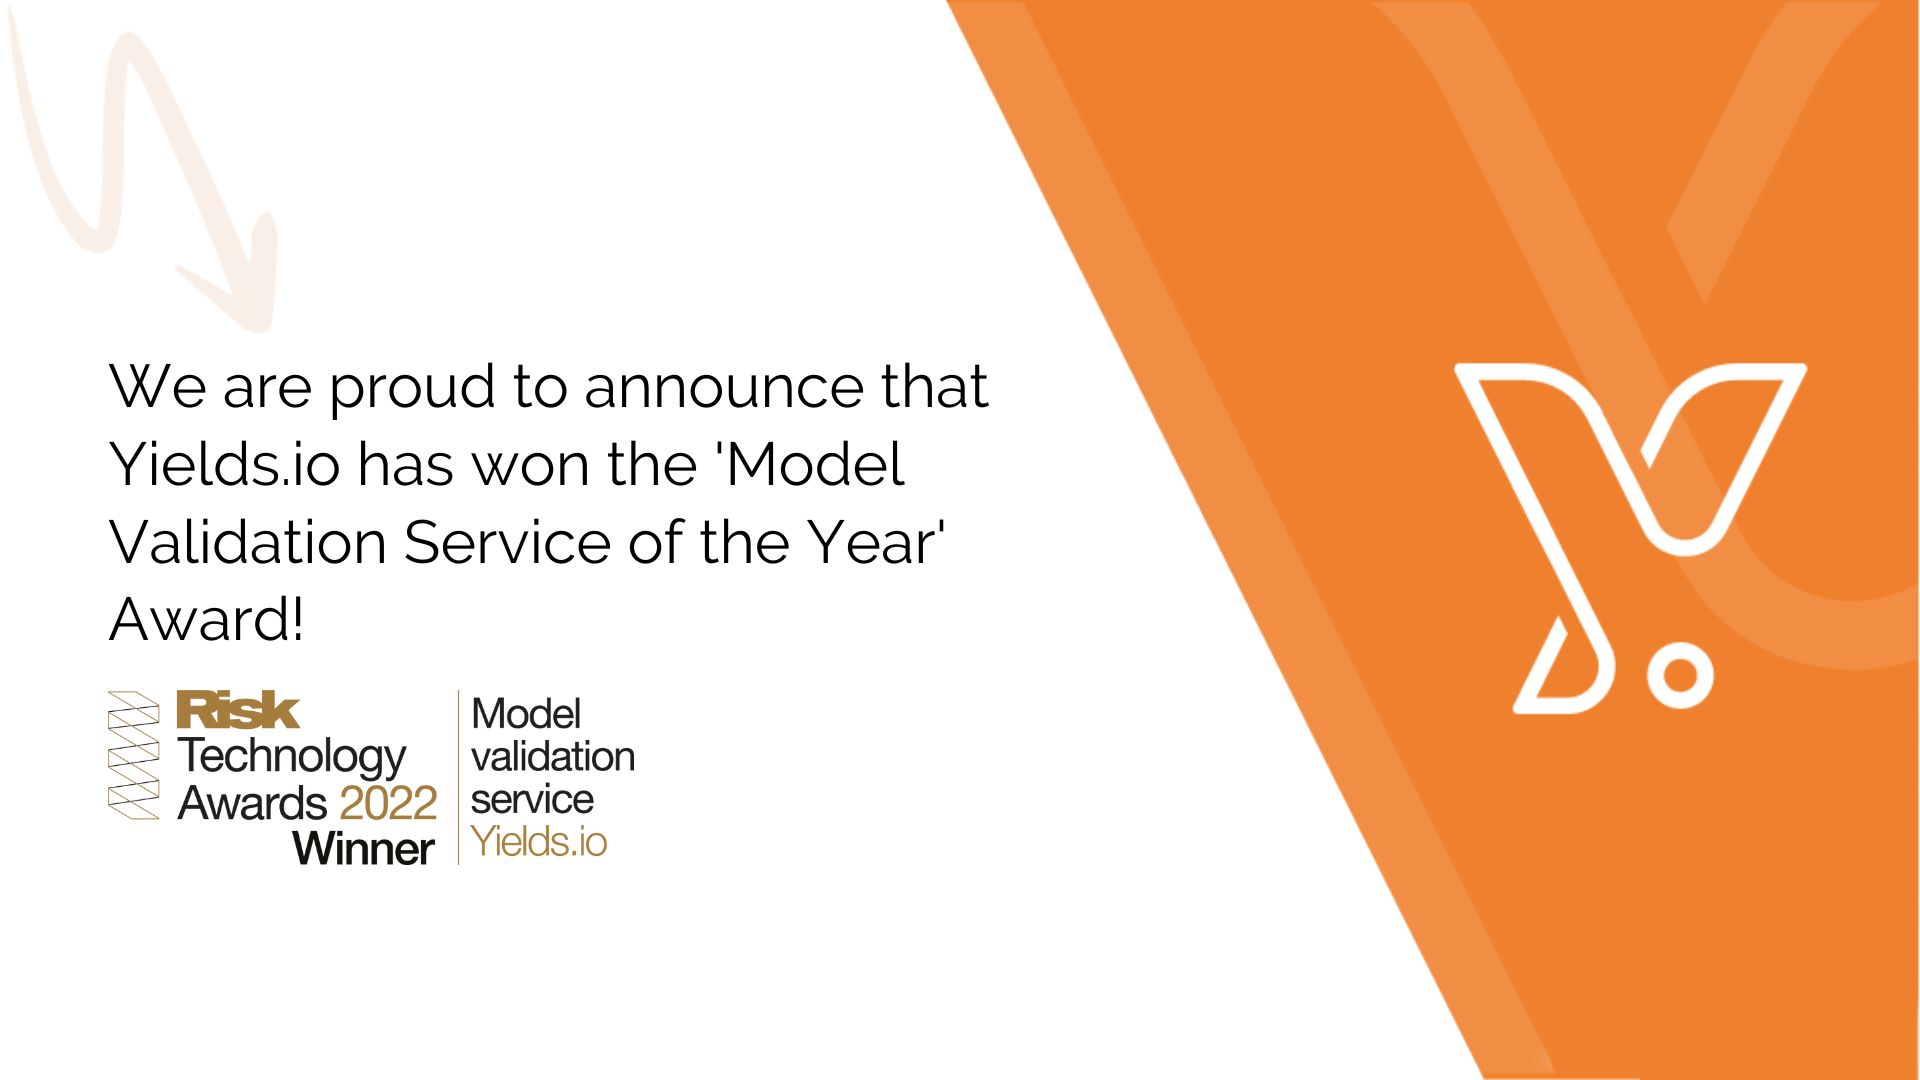 We have won the ‘Model Validation Service of the Year’ award, 2022